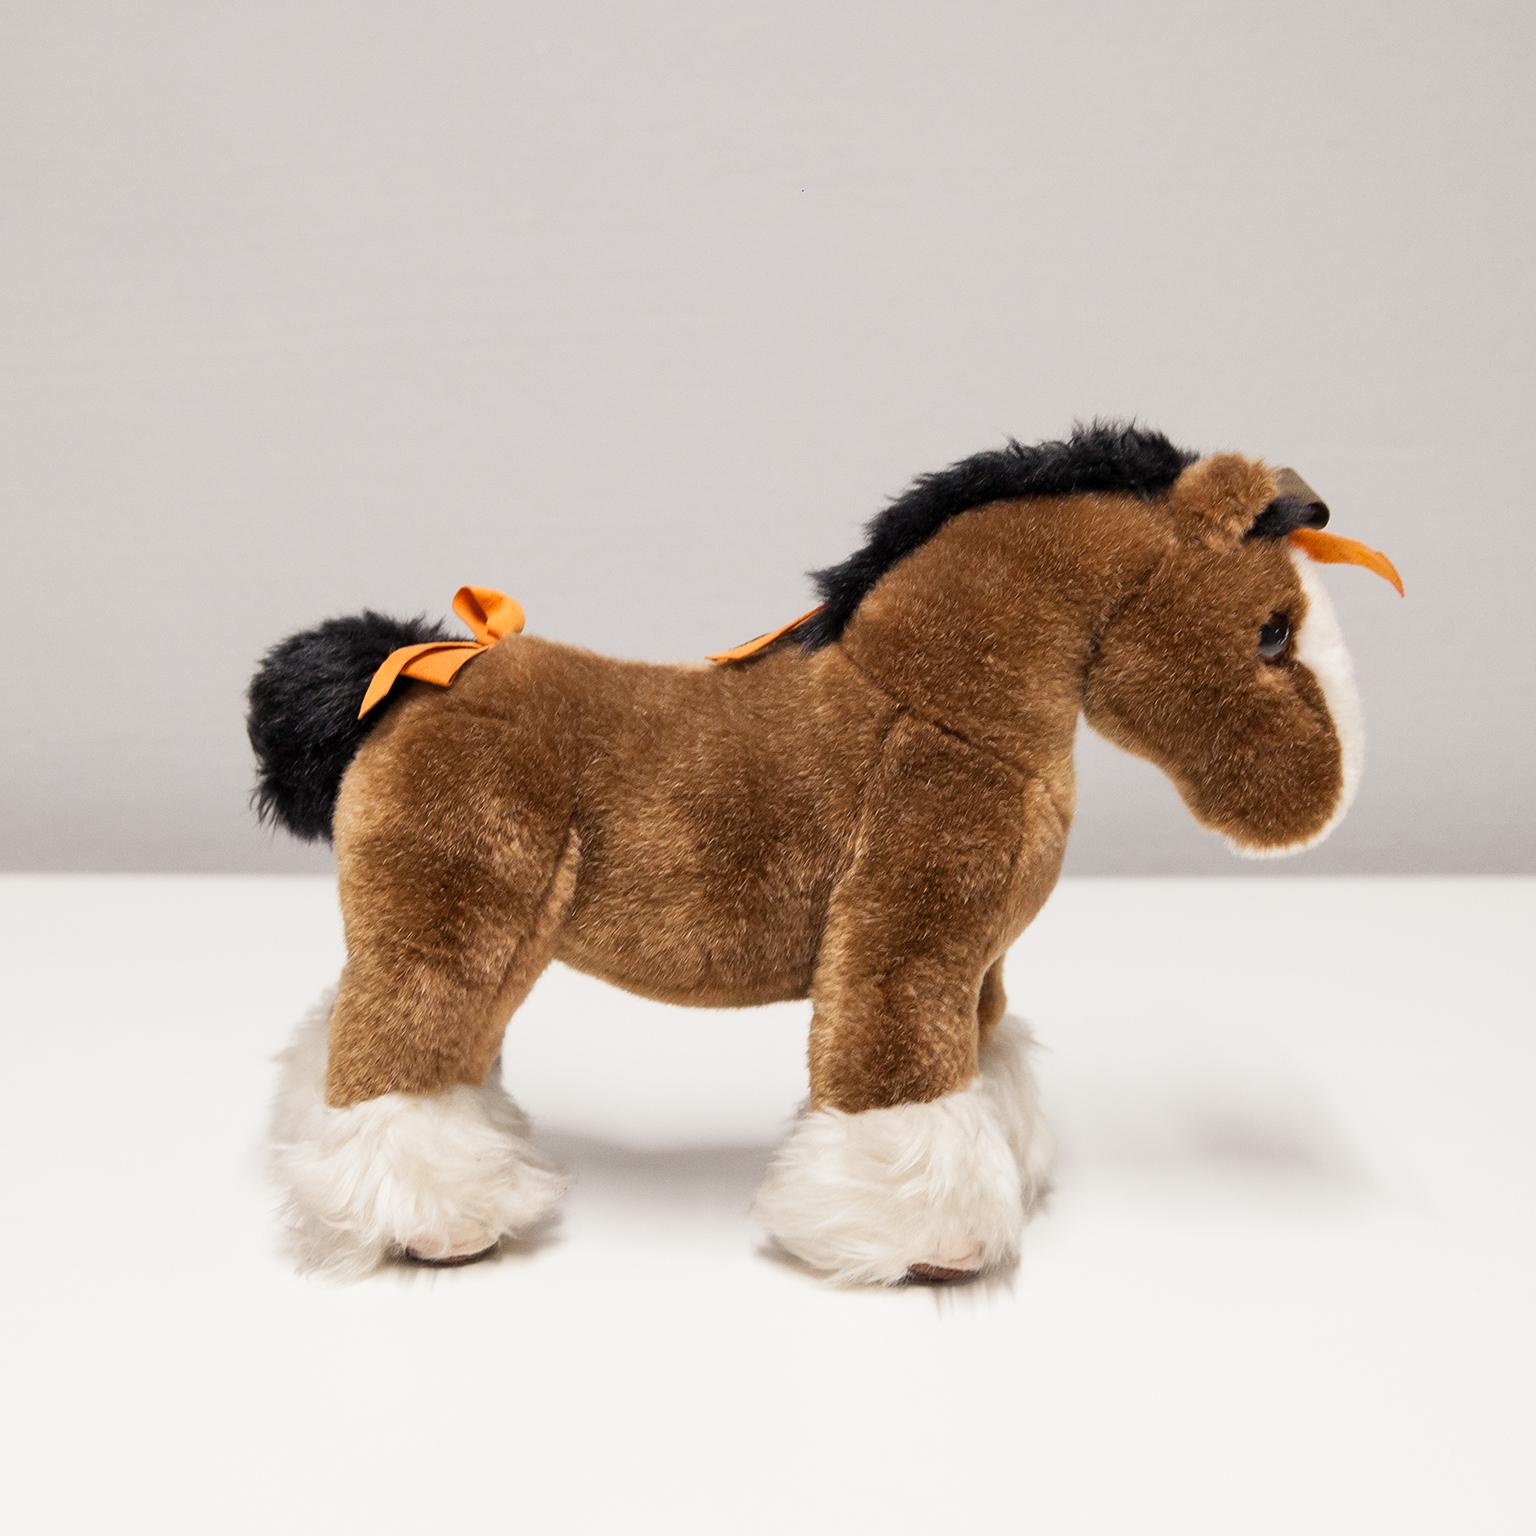 hermes horse toy